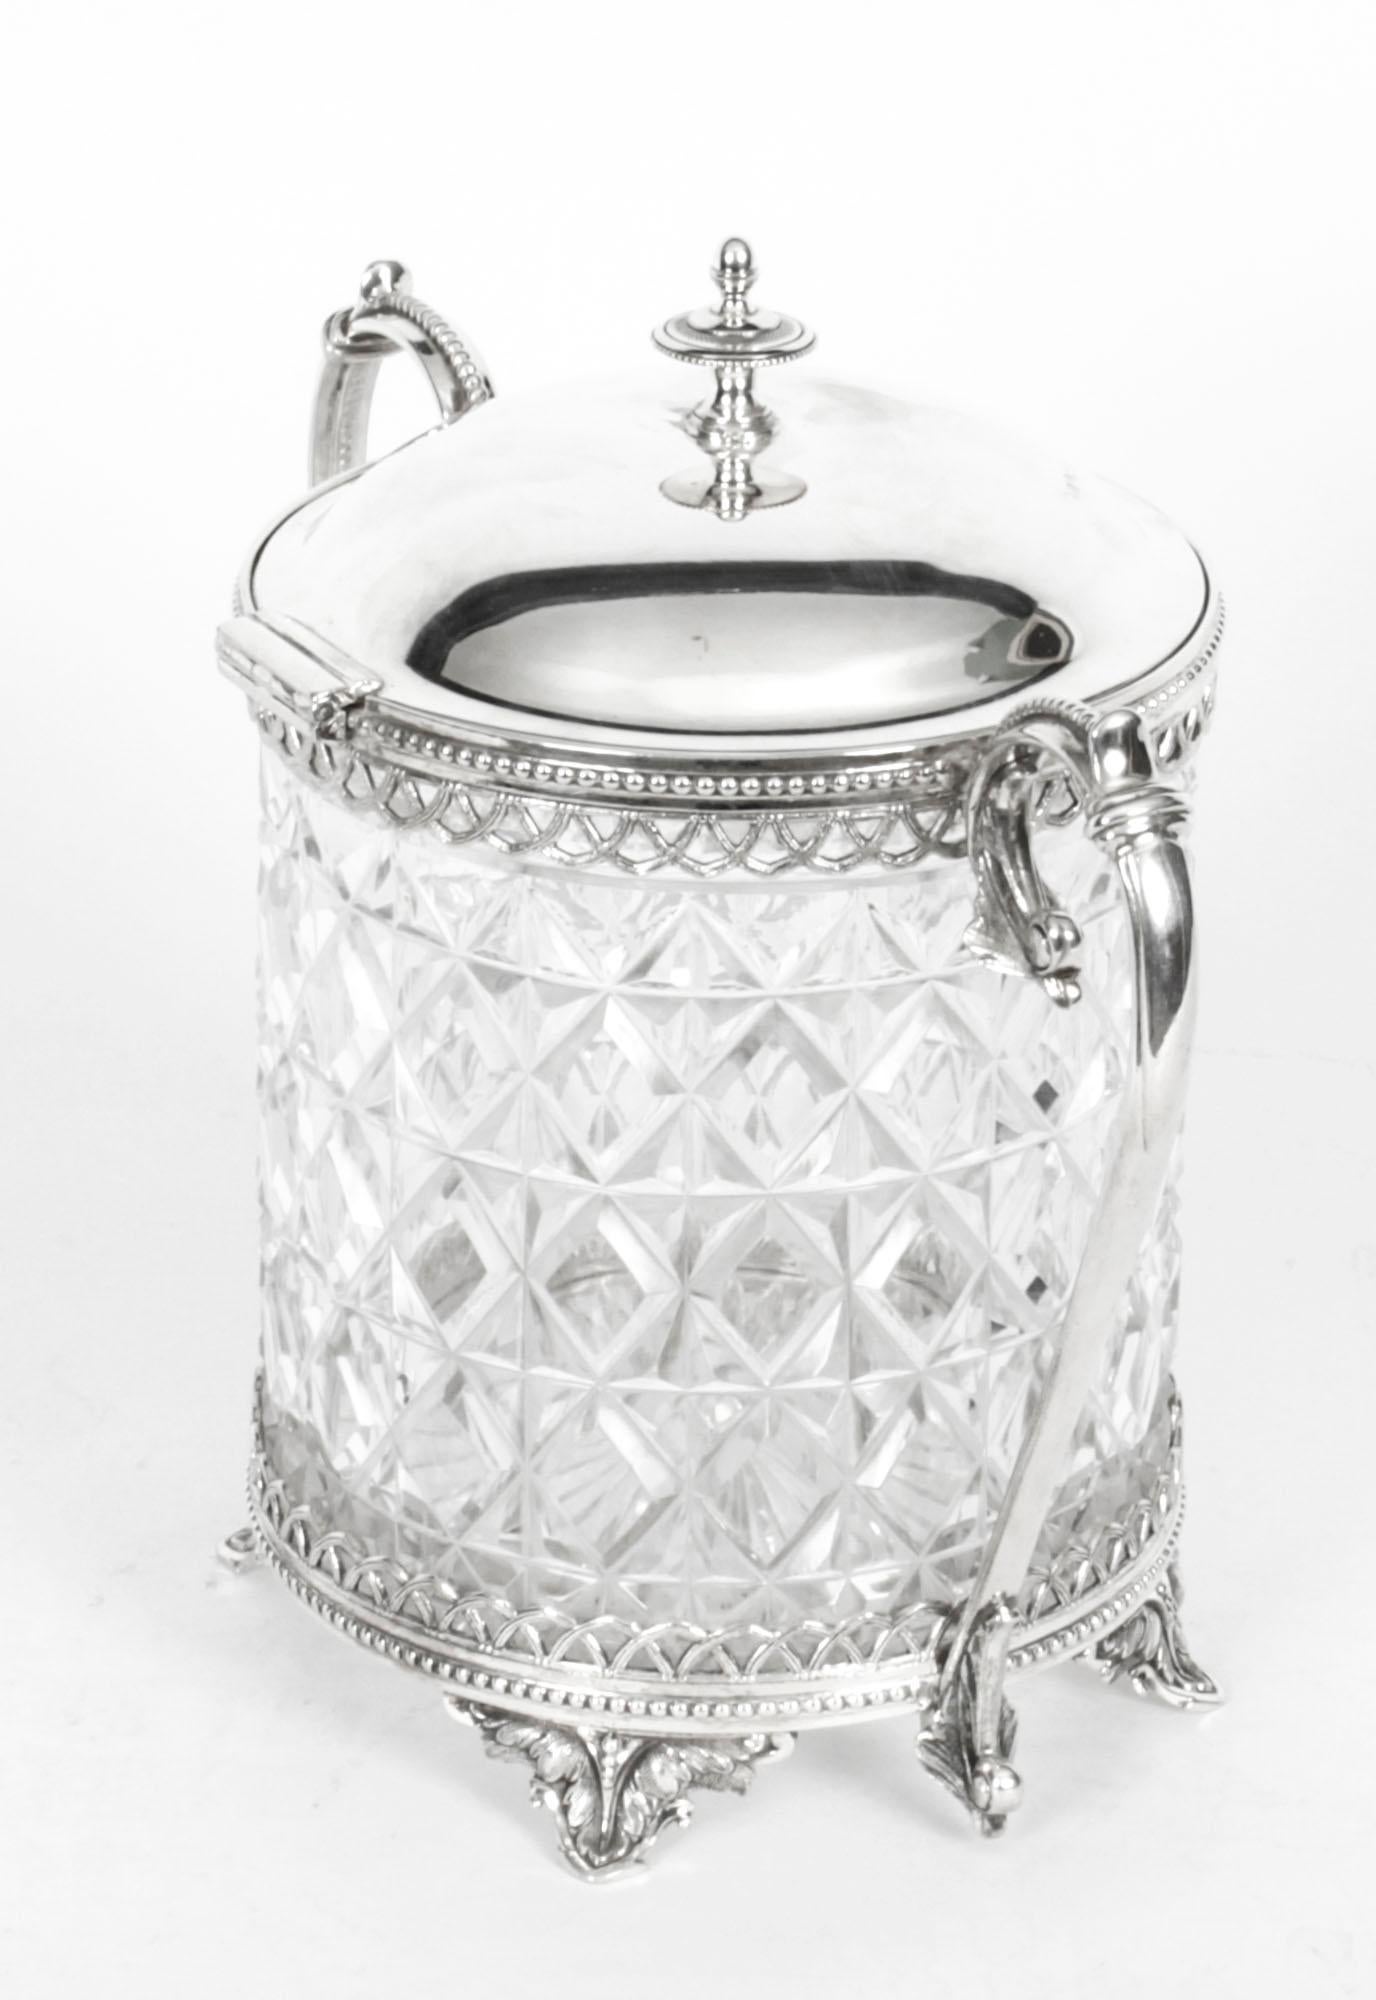 This is an exquisite cut glass and silver plate biscuit box by John Round Sheffield, dating from the late 19th Century.

The the cylindrical body features a cut glass liner with diamond cut pattern incased in a silver plated circular body with